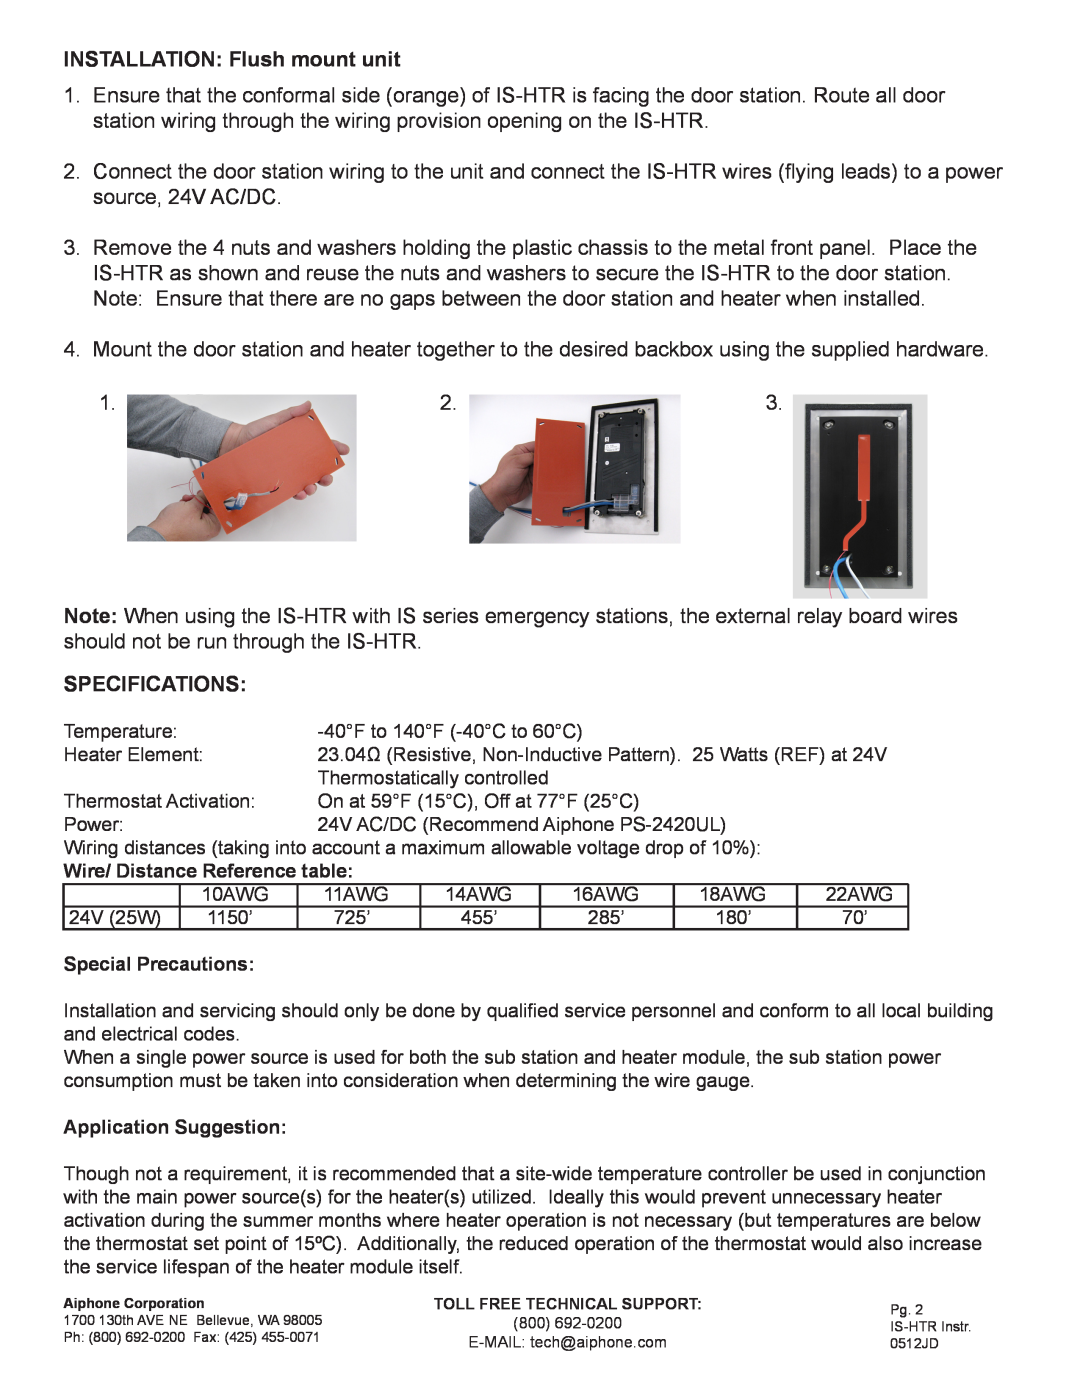 Aiphone IS-HTR manual INSTALLATION Flush mount unit, Specifications, Wire/ Distance Reference table, Special Precautions 